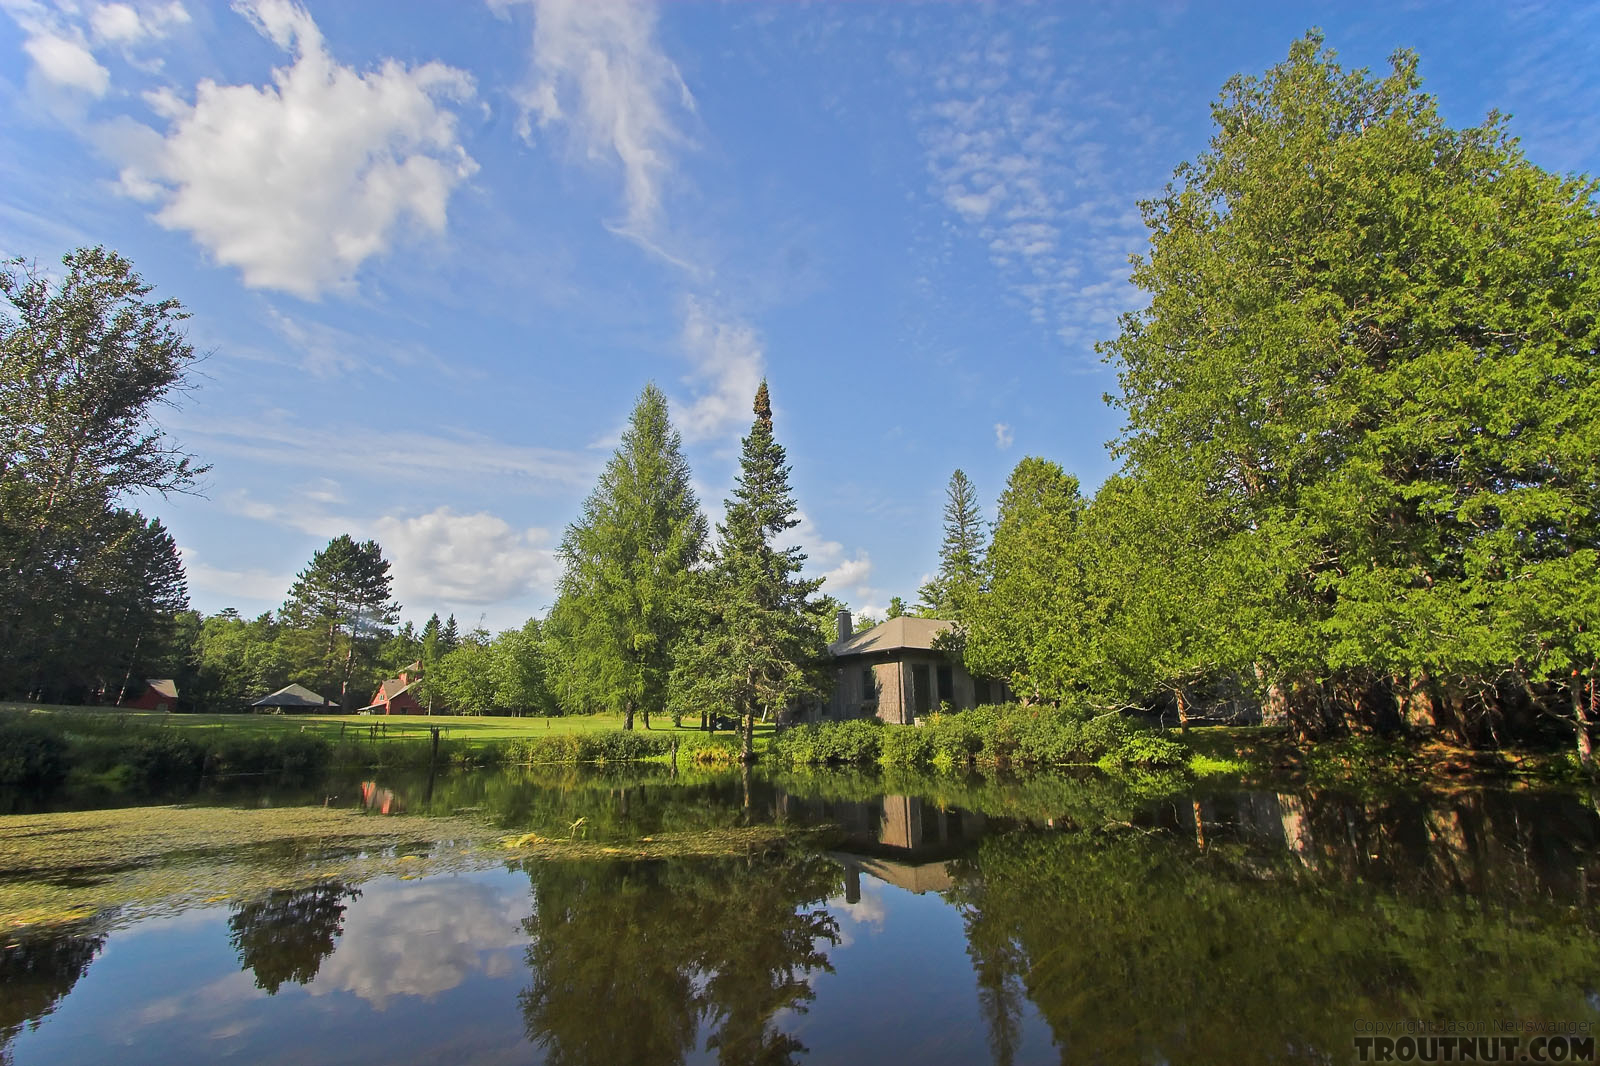 This incredibly expensive estate holds most of the land on a prime upper stretch of one of the midwest's best trout streams, and it's the envy of hundreds of anglers who float by it every summer. From the Bois Brule River in Wisconsin.